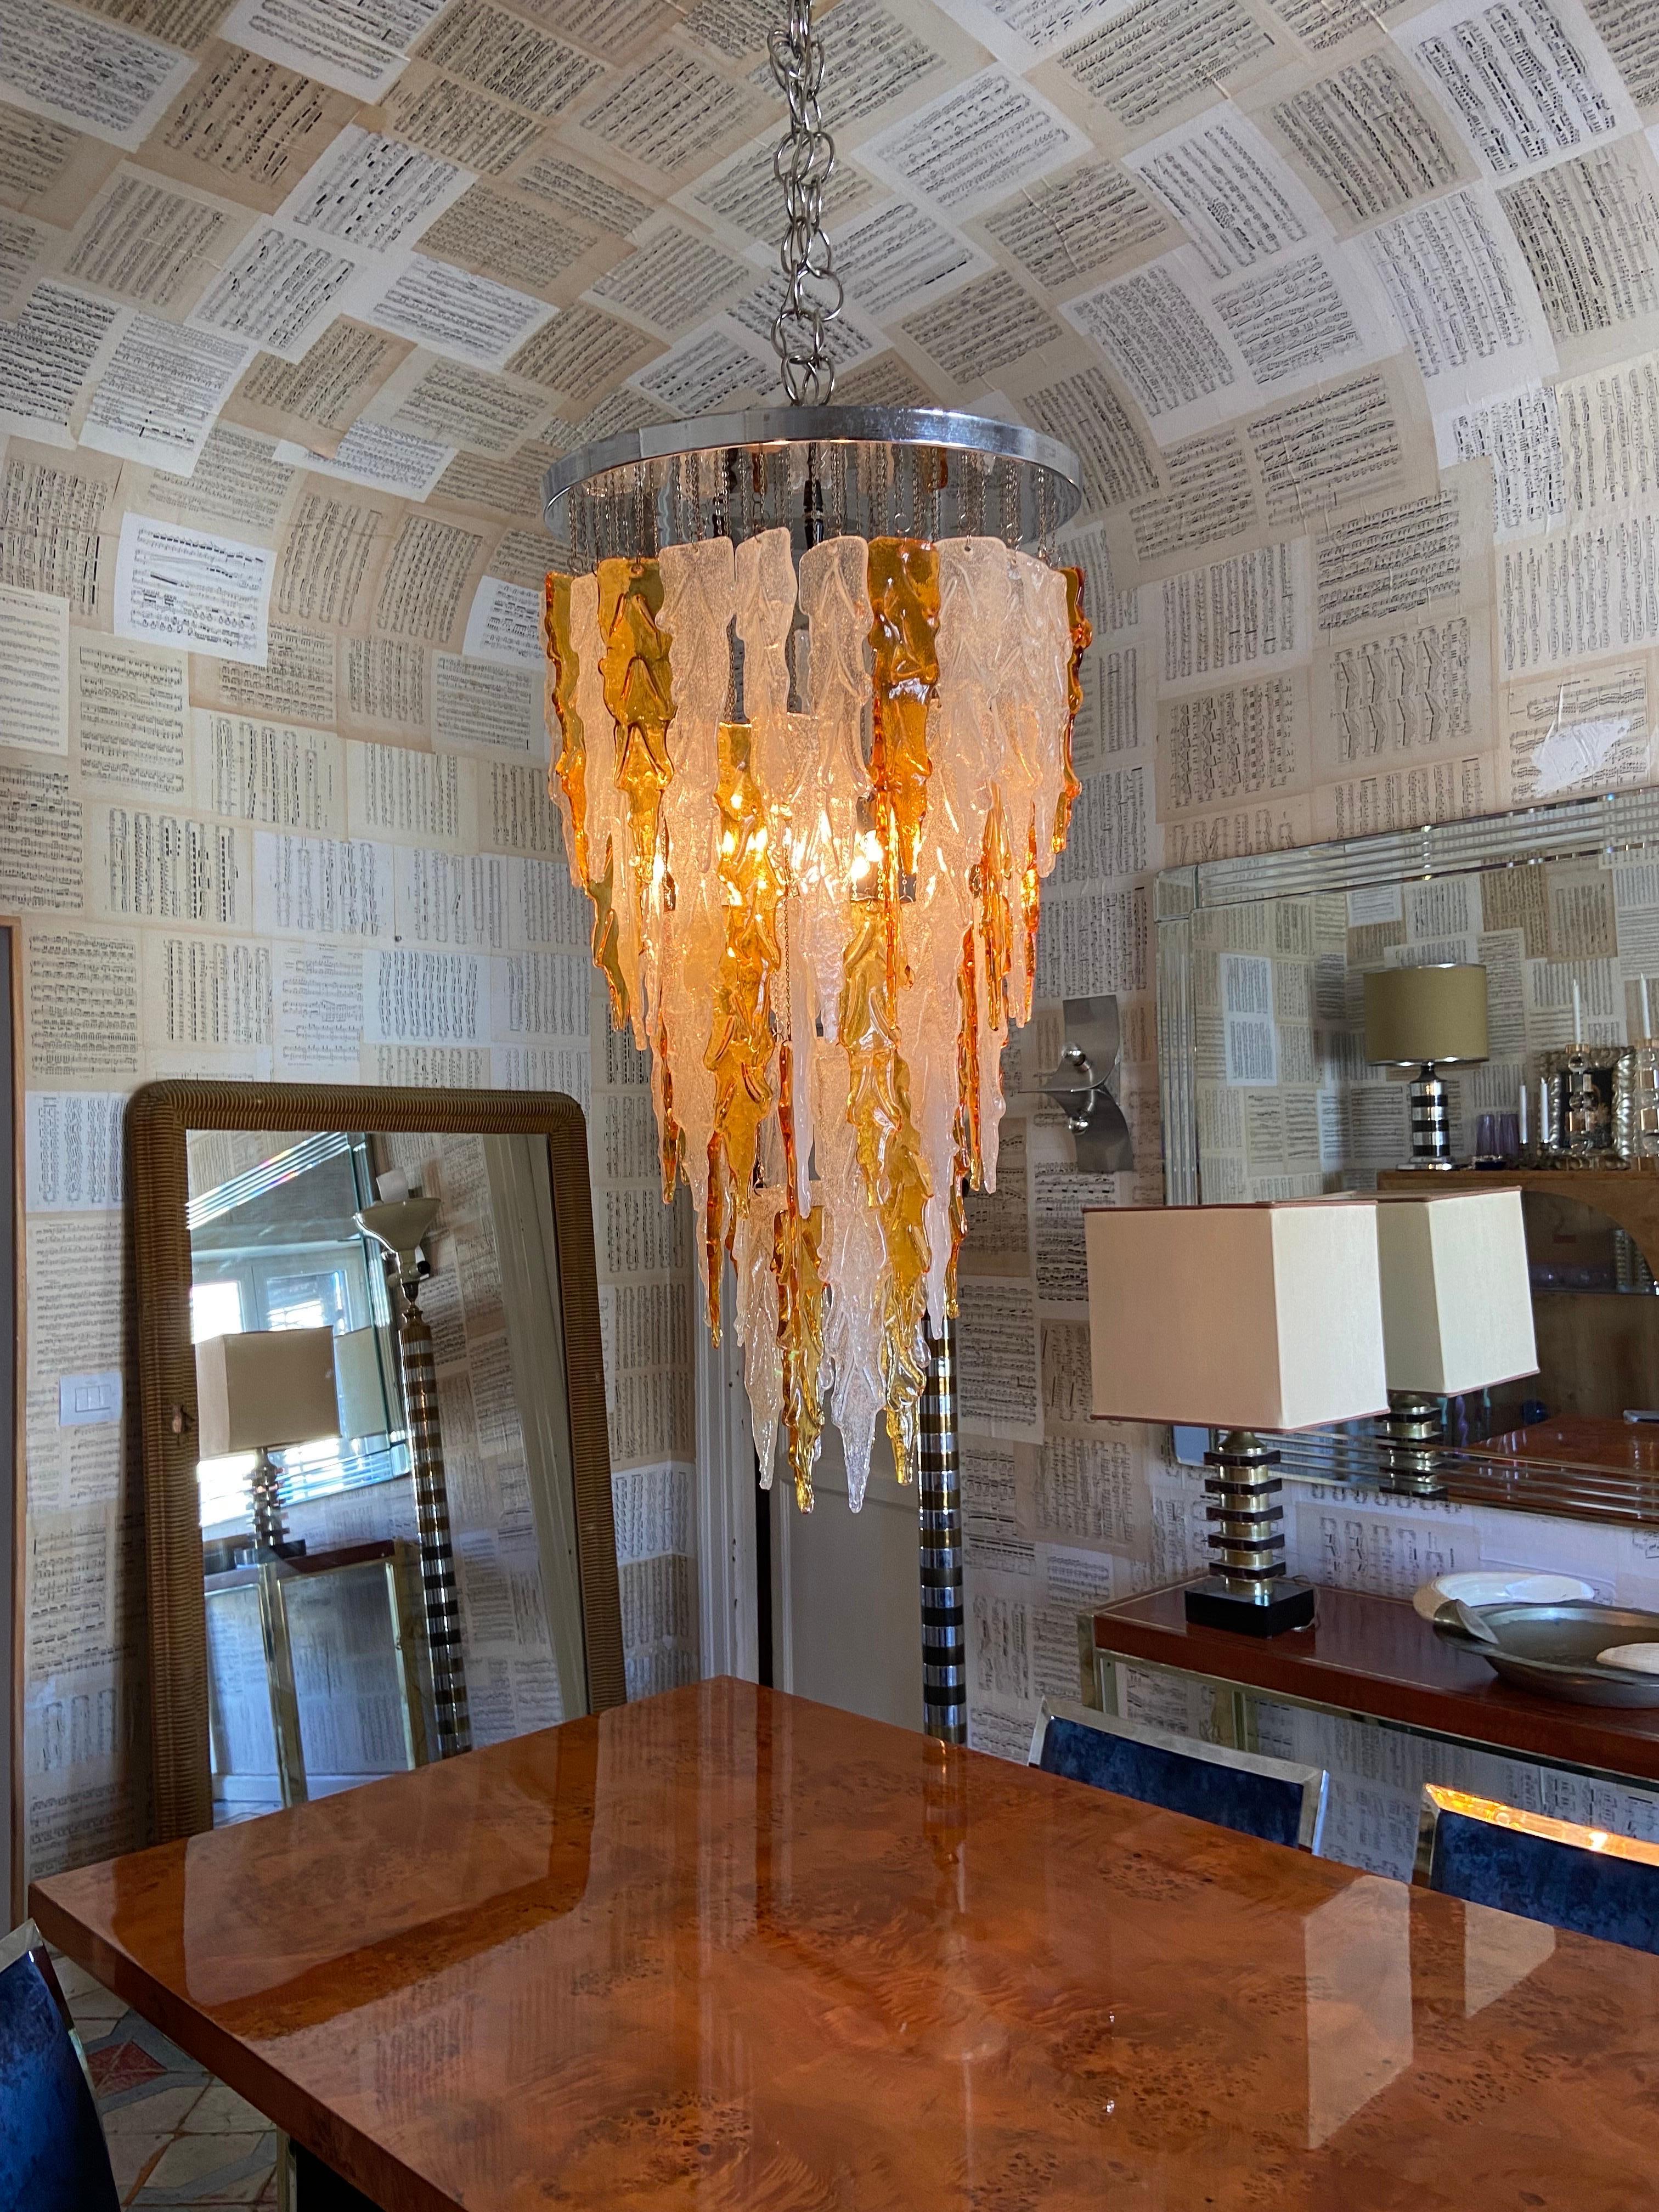 Amazing chandelier designed by Albano Poli. Suspension lamp, cylinder body, chromed metal structure decorated with white and amber Murano glass leaves. Poliarte production, Italy 1970 ca.

Details
Creator: Albano Poli, Murano
Dimensions: Height: